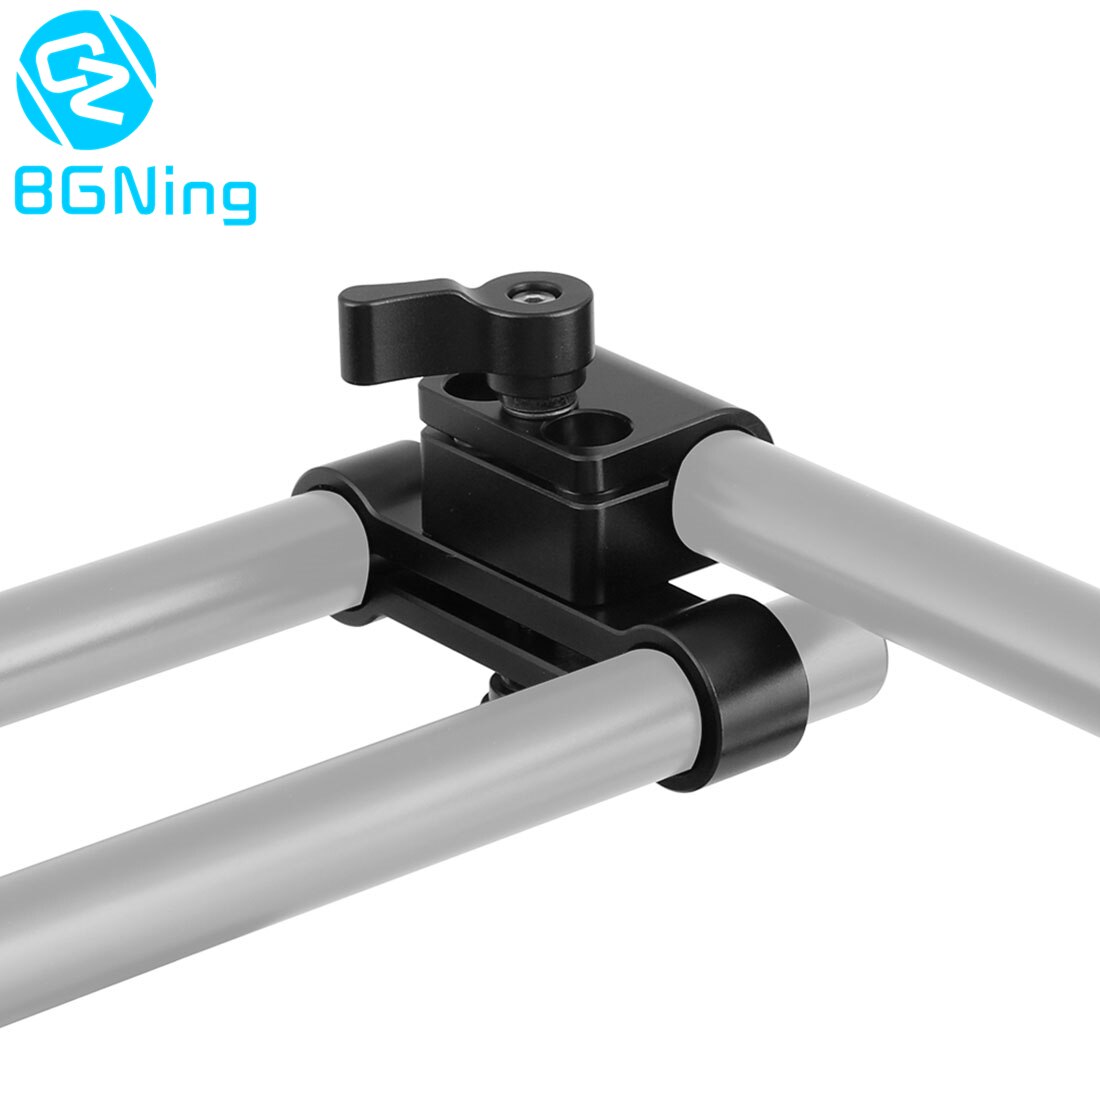 BGNing 15mm Single Rod Clamp to Dual Rod Clamp Adapter w/ Locking Knob / w/ M6 ARRI Rosette Mount Baseplate for DSLR Camera Rig